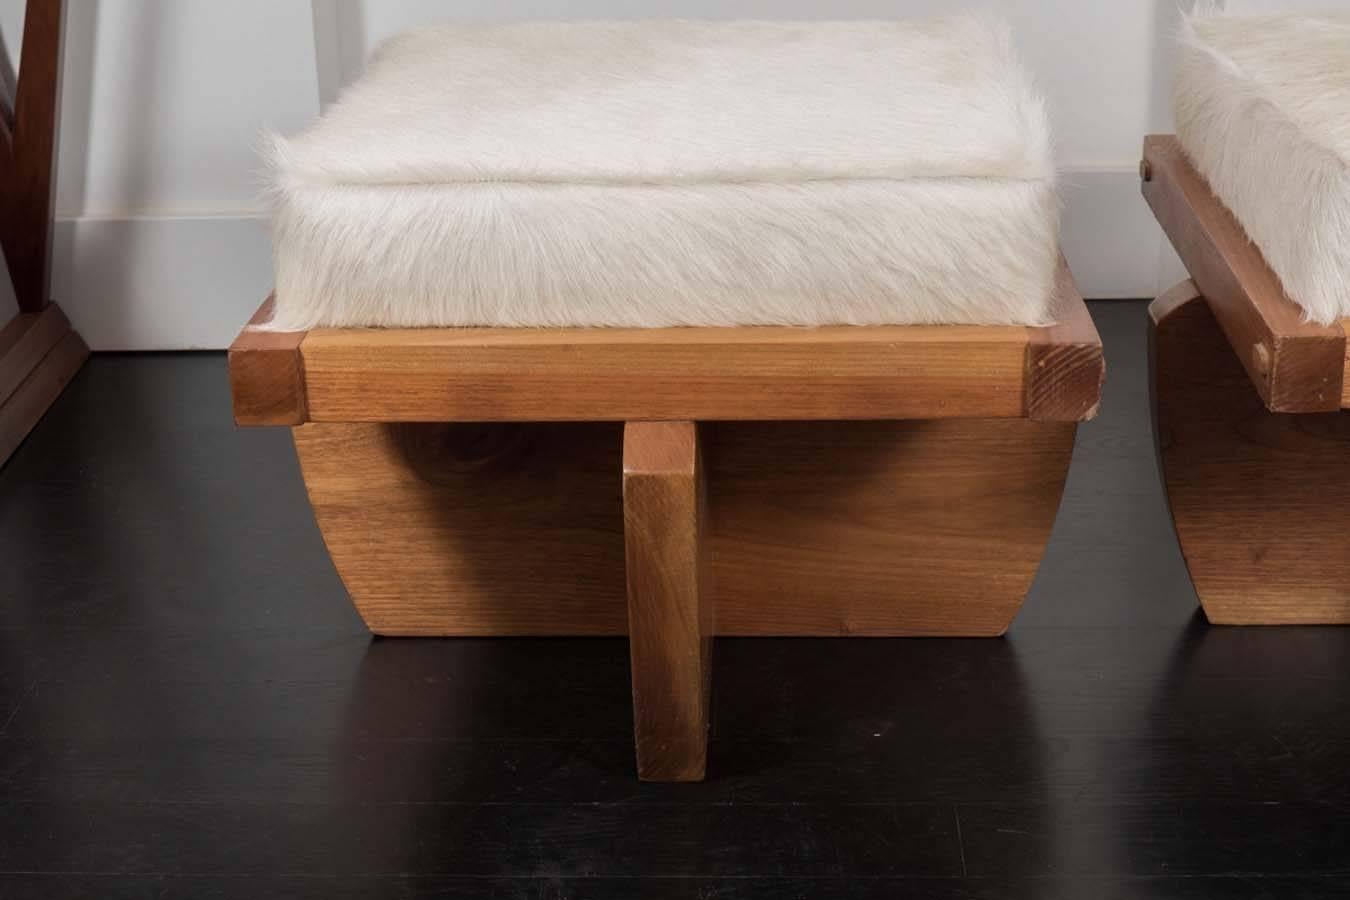 Pair of oak benches with cowhide upholstered seats.